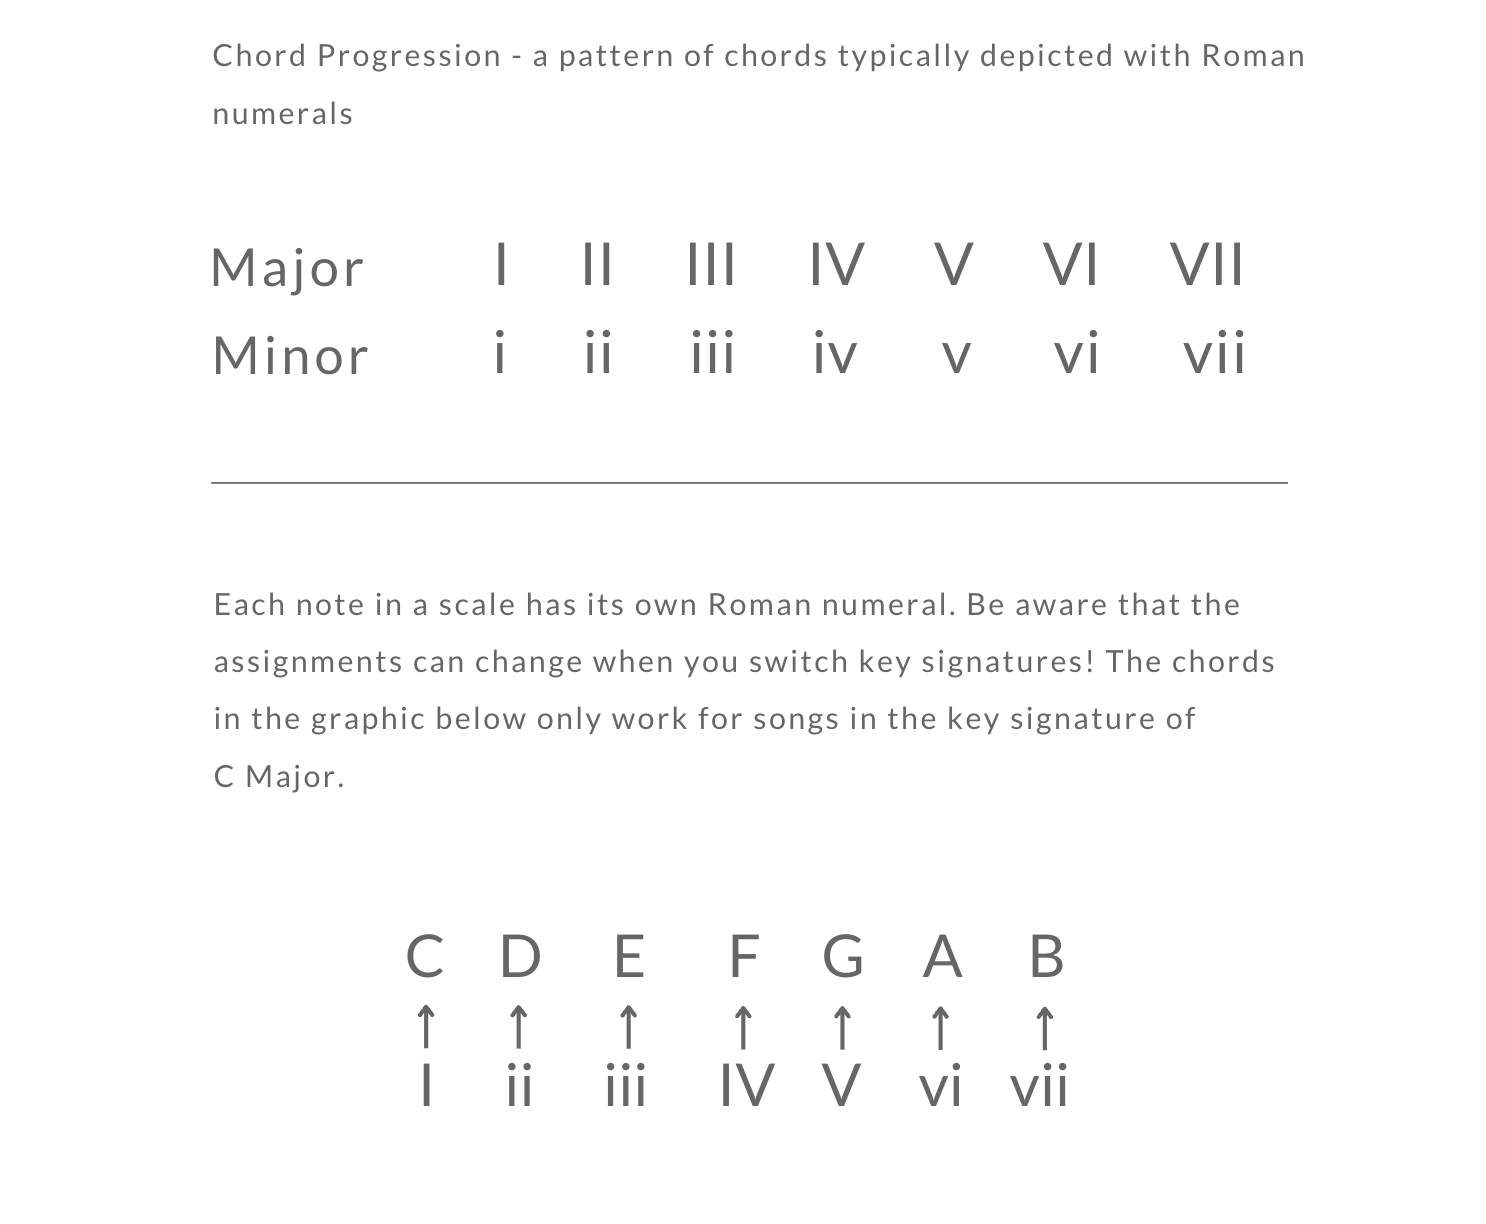 Chord Progression Definition: a pattern of chords typically depicted with Roman numerals